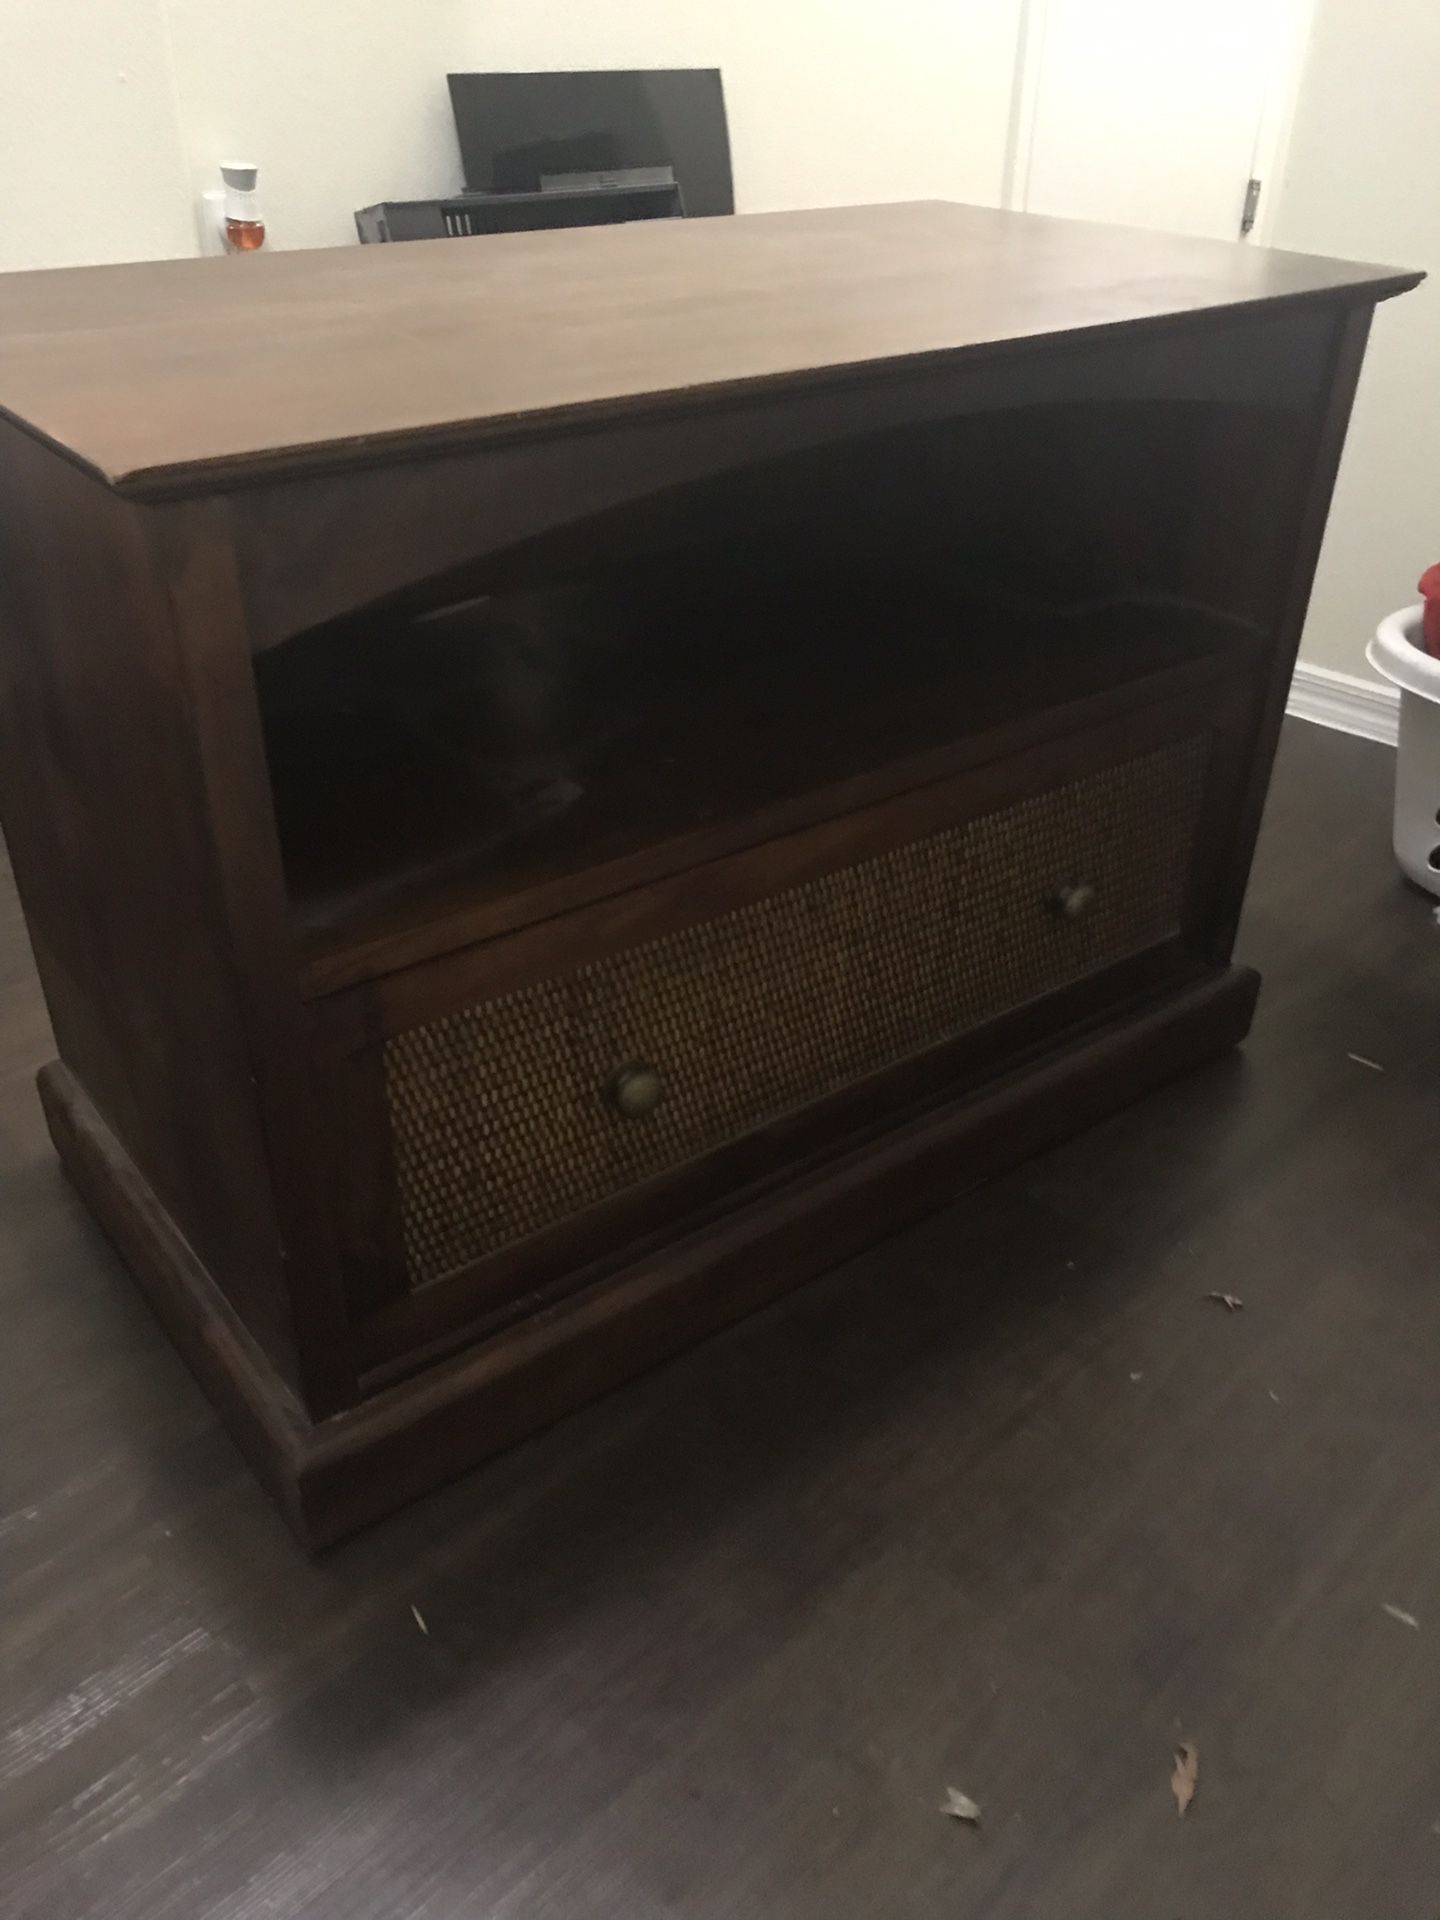 Tv stand or end table 4’x2’ no issues or damage